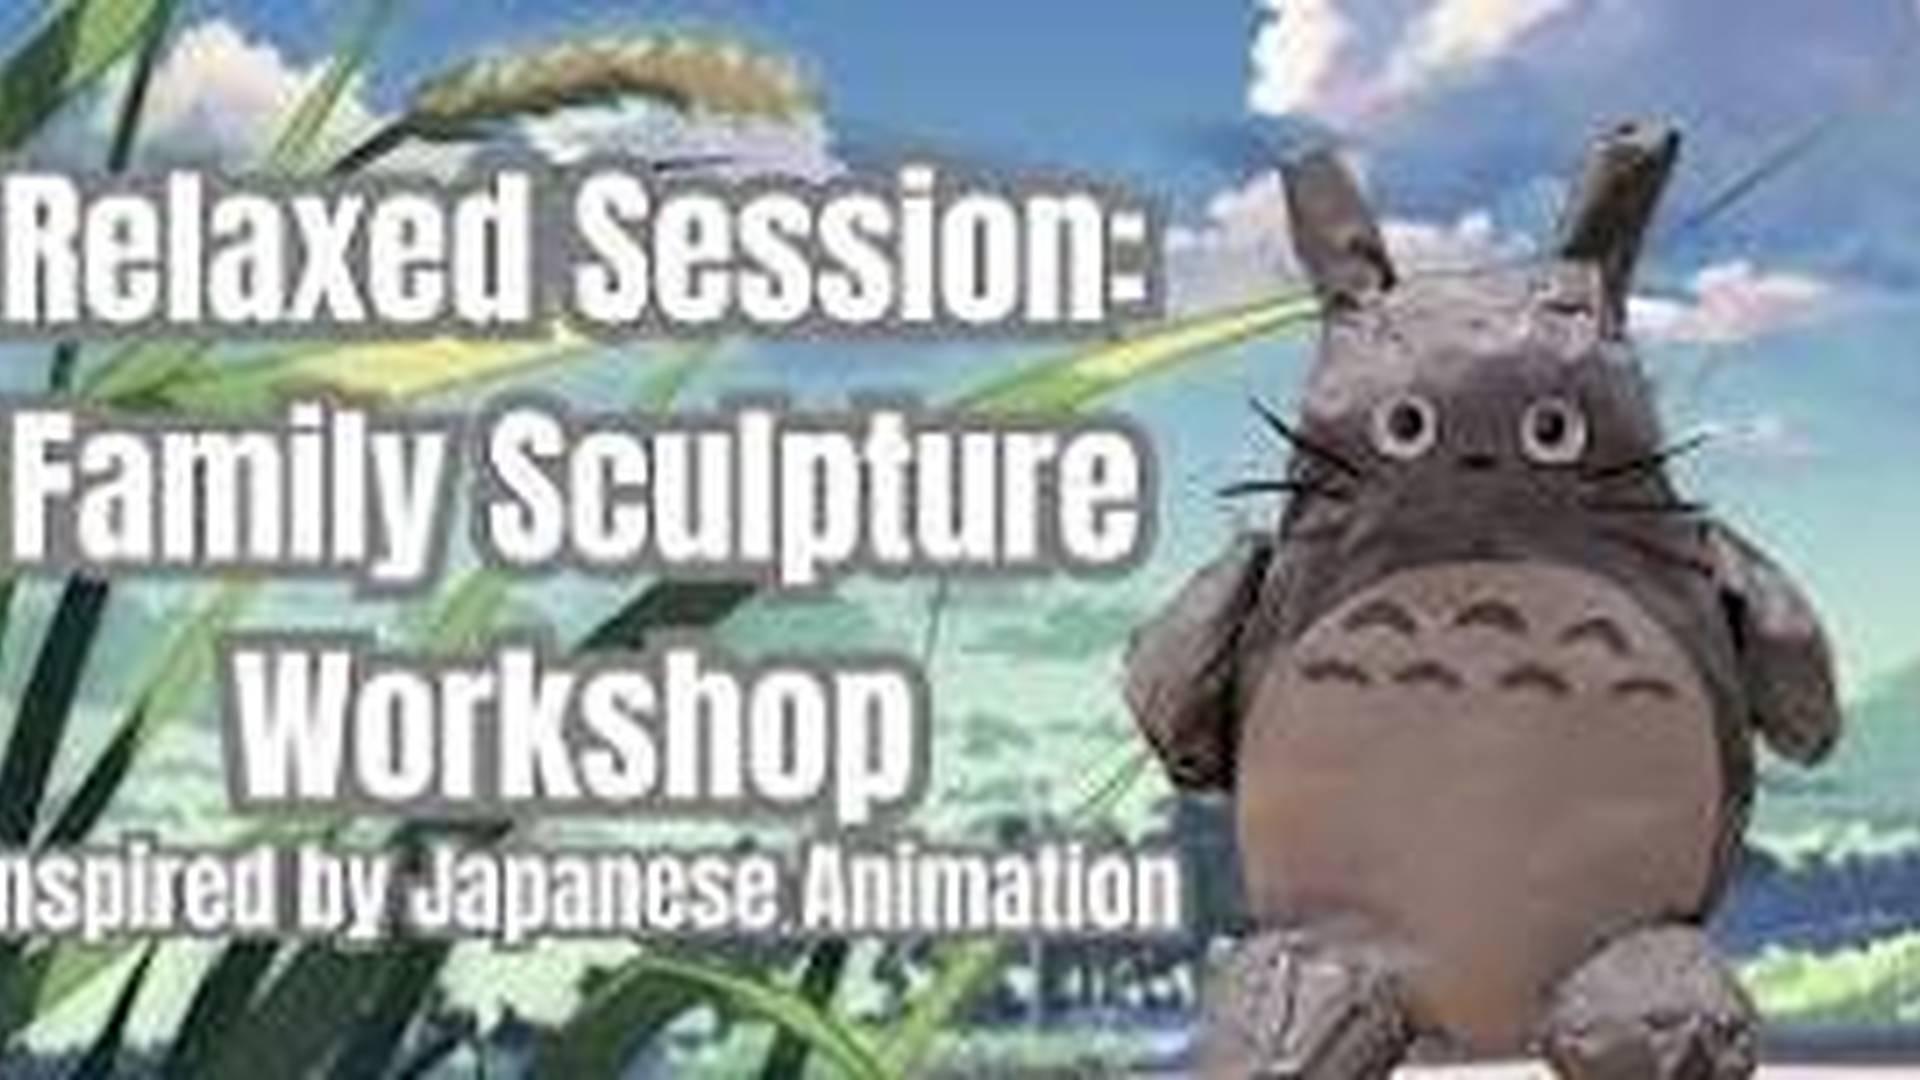 Relaxed Session: Family Sculpture Workshop Inspired by Japanese Animation photo